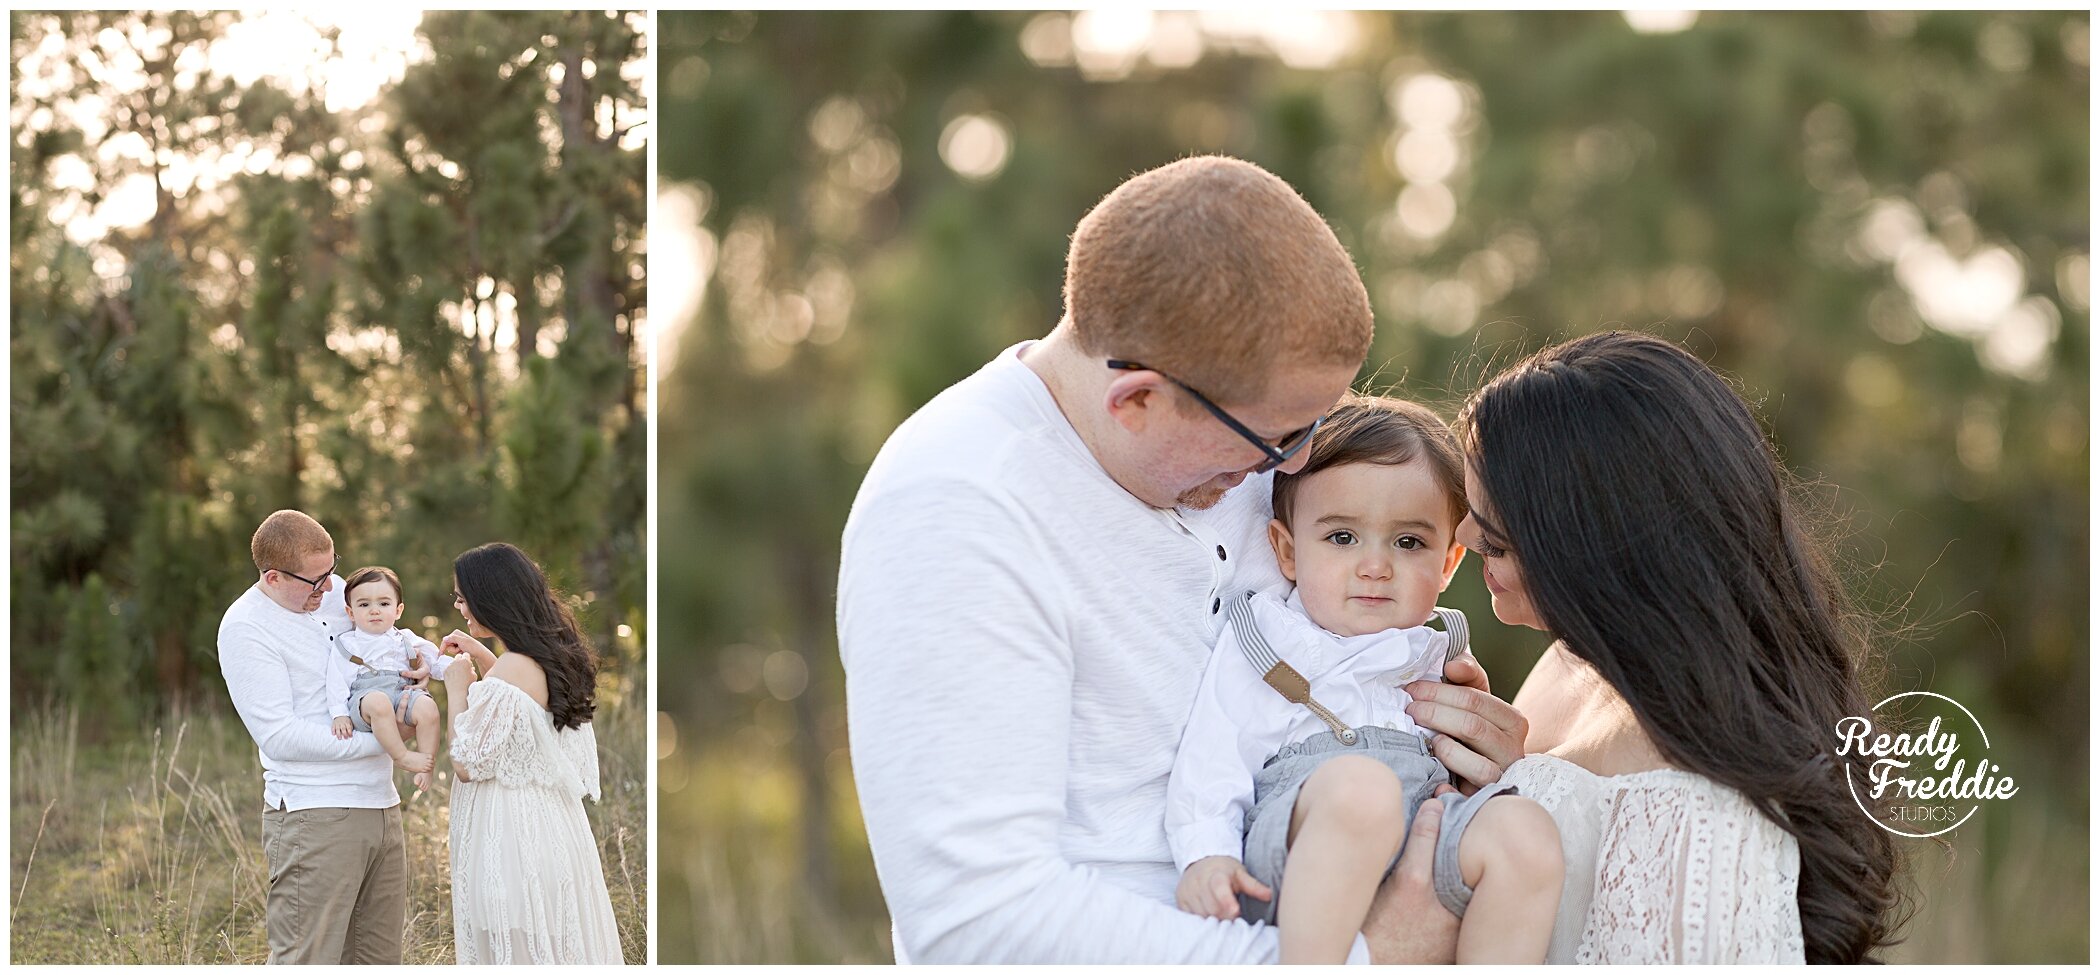 Must have photos during a family photoshoot session with Ivanna Vidal Photography